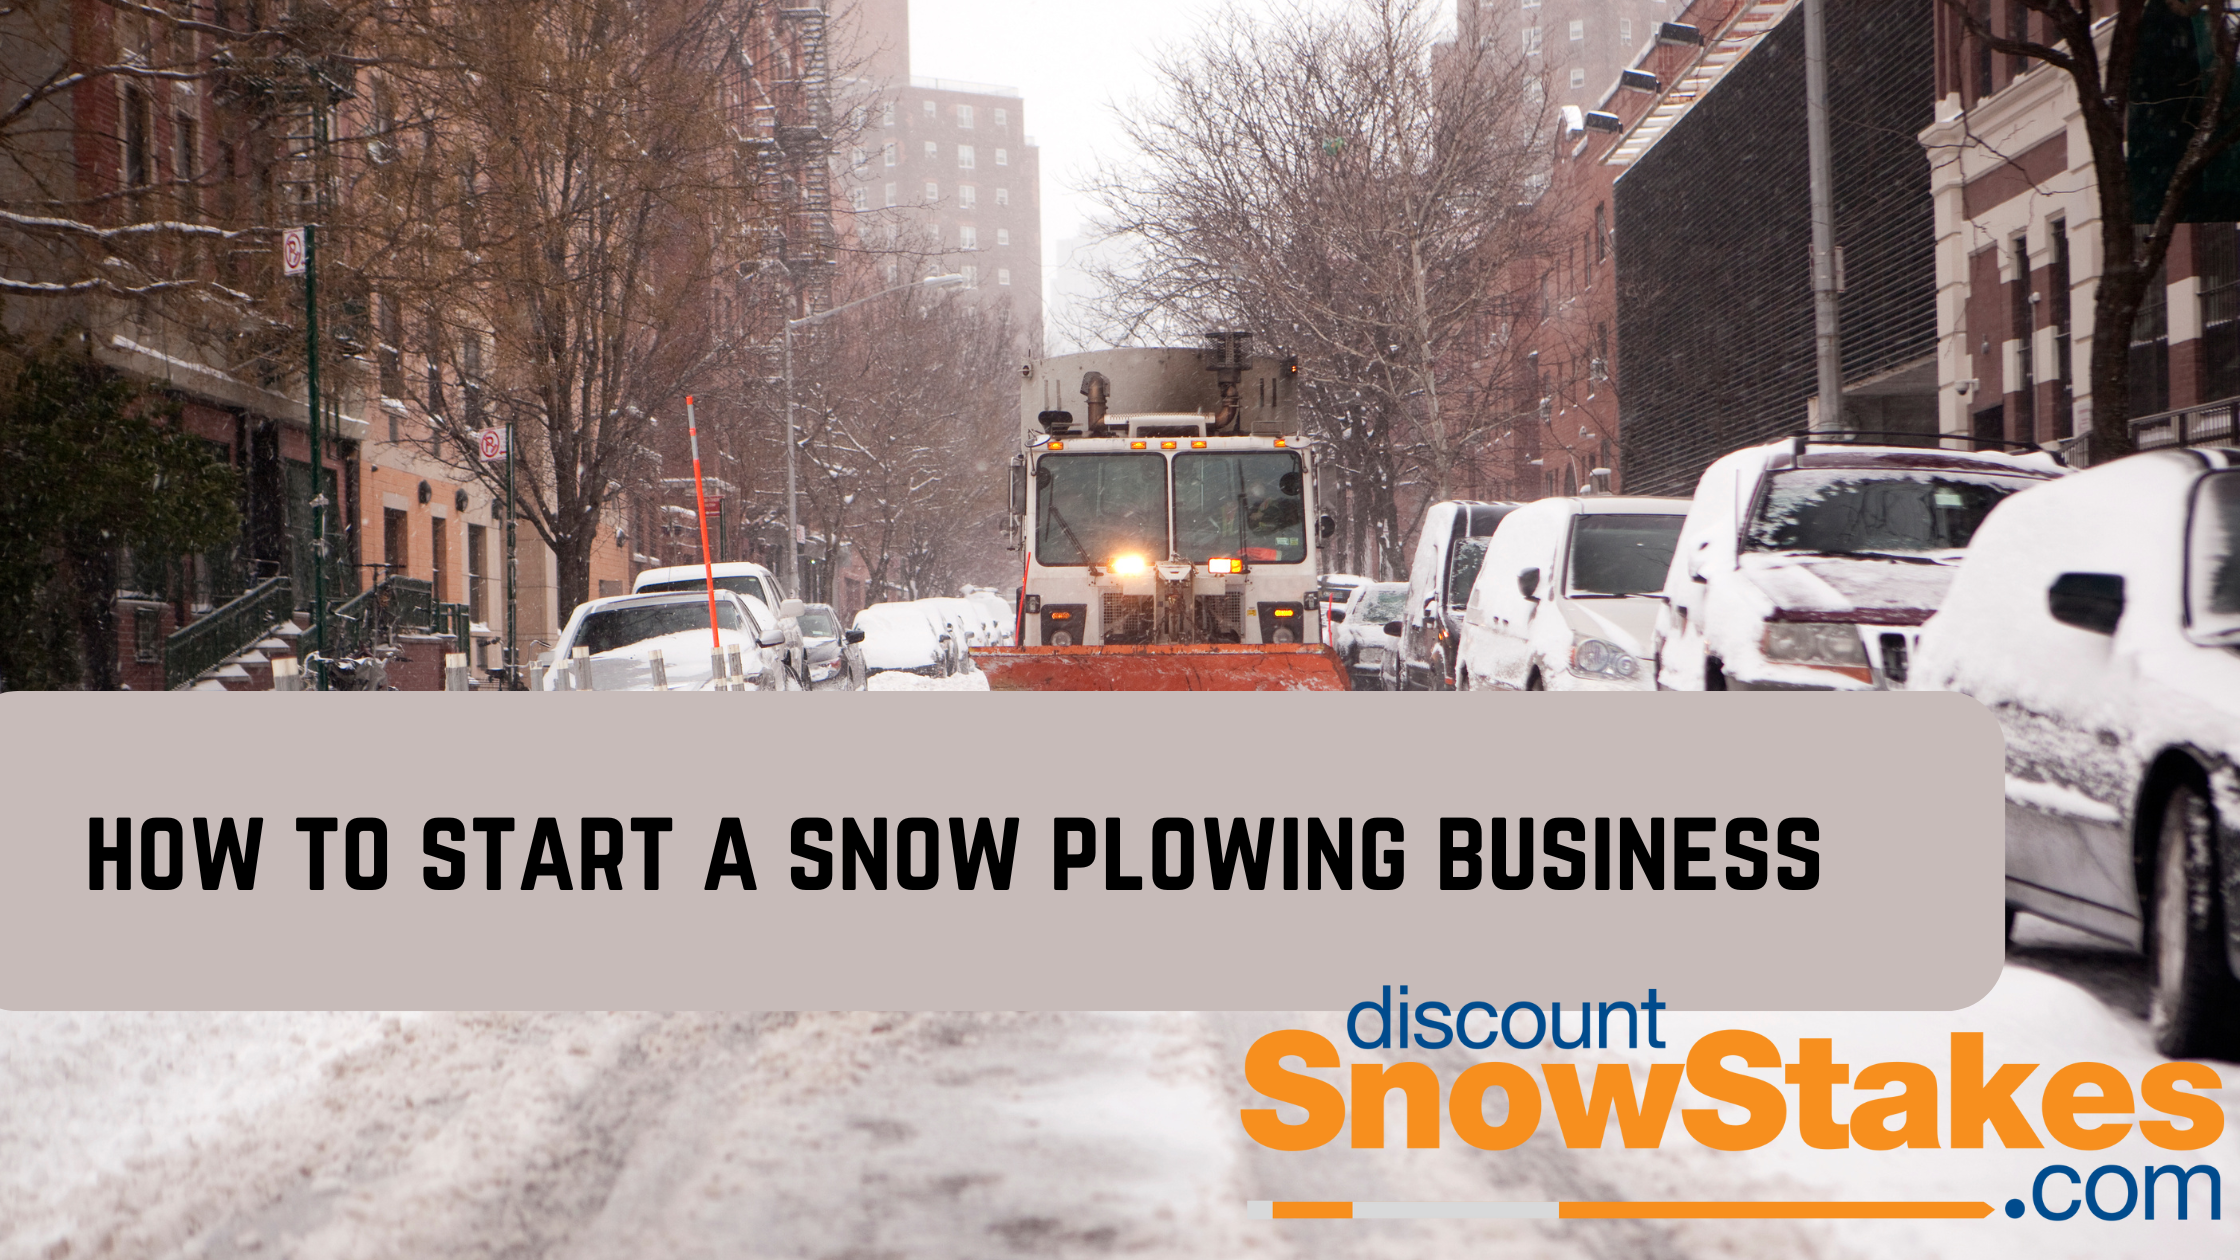 How to Start a Snowplowing Business